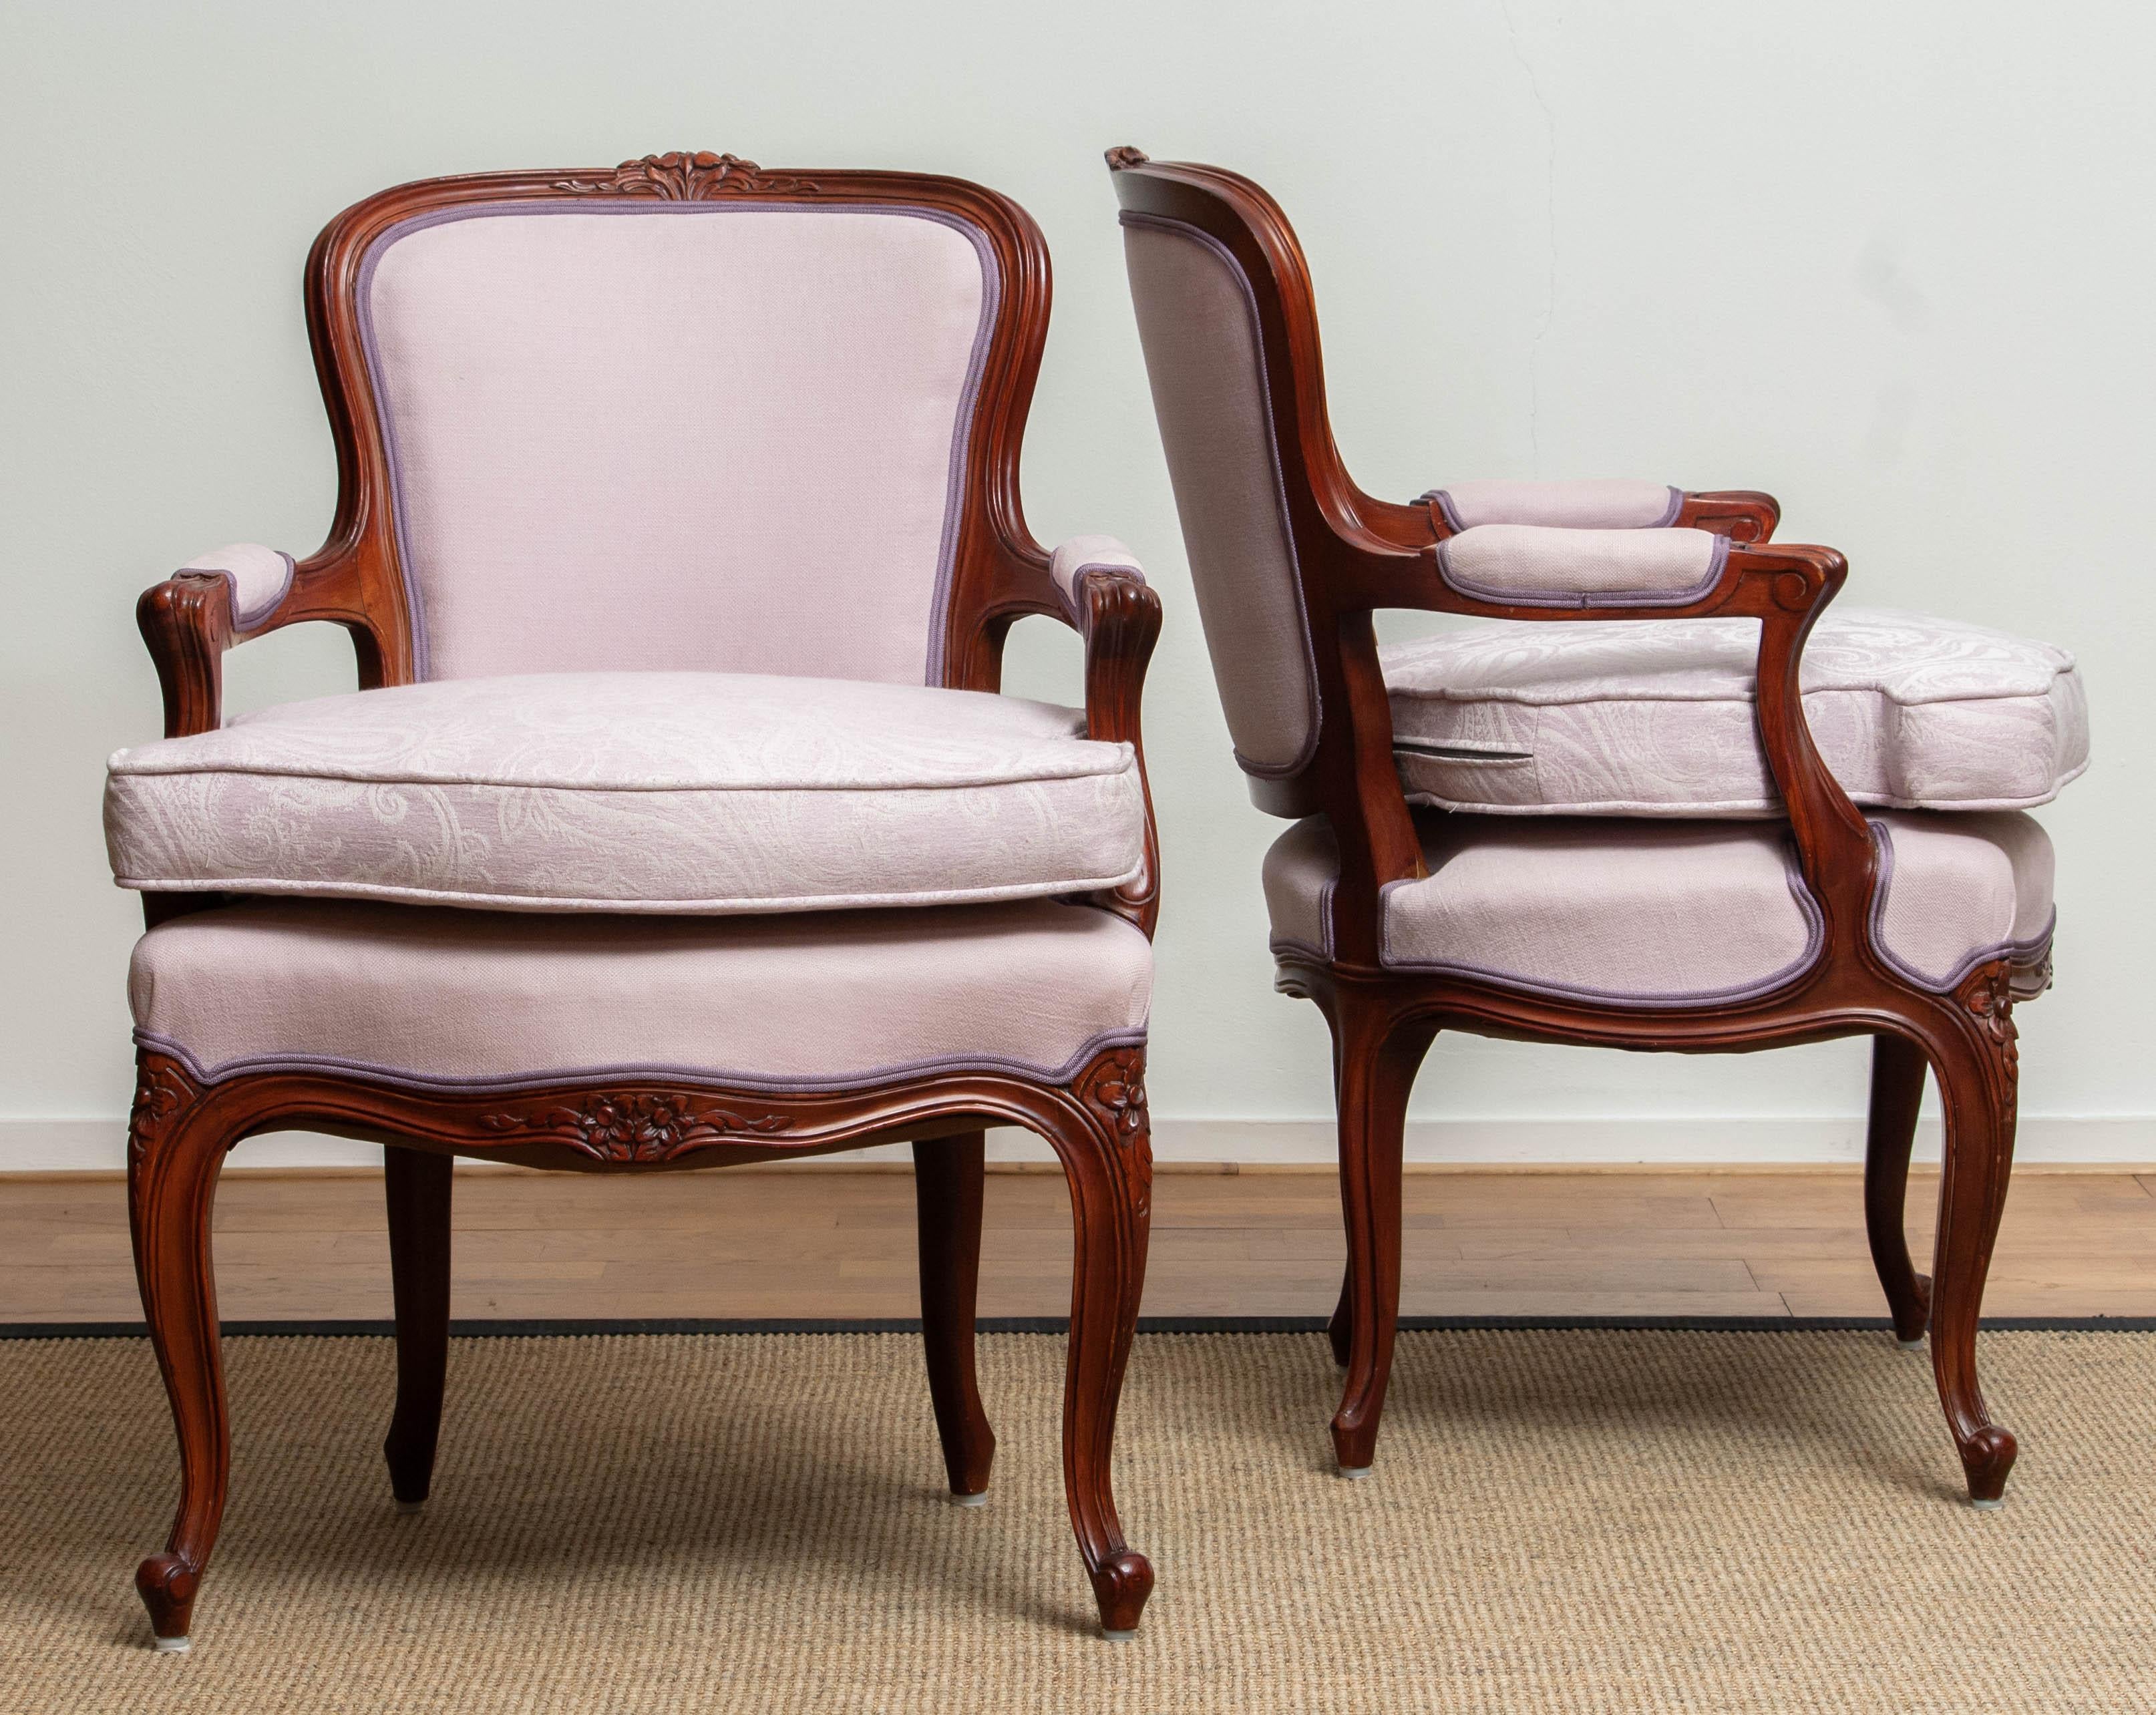 1950 Pair of Pink Swedish Rococo Bergères in the Shabby Chic Technique Chairs F 2